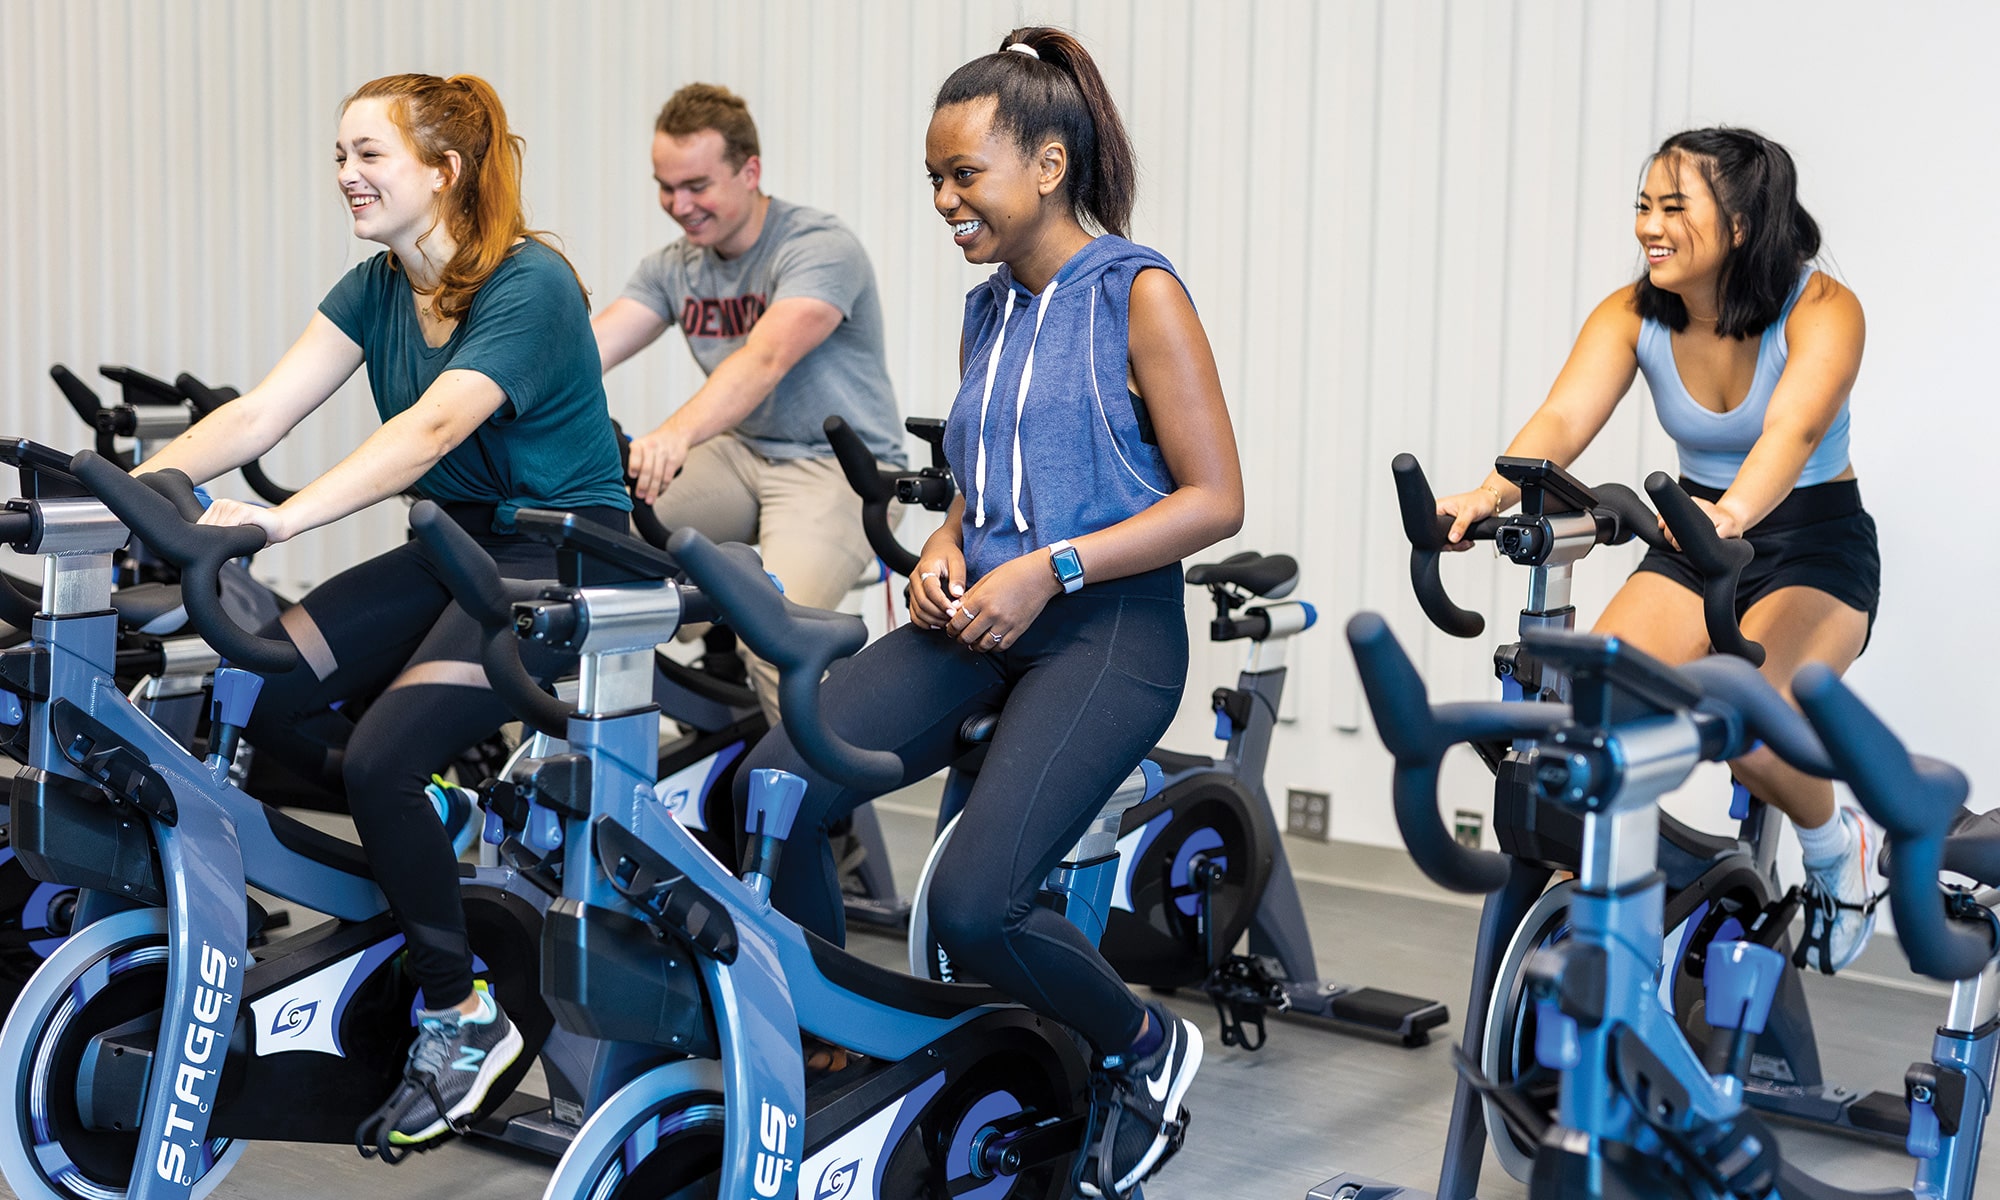 Students cycling at the wellness center